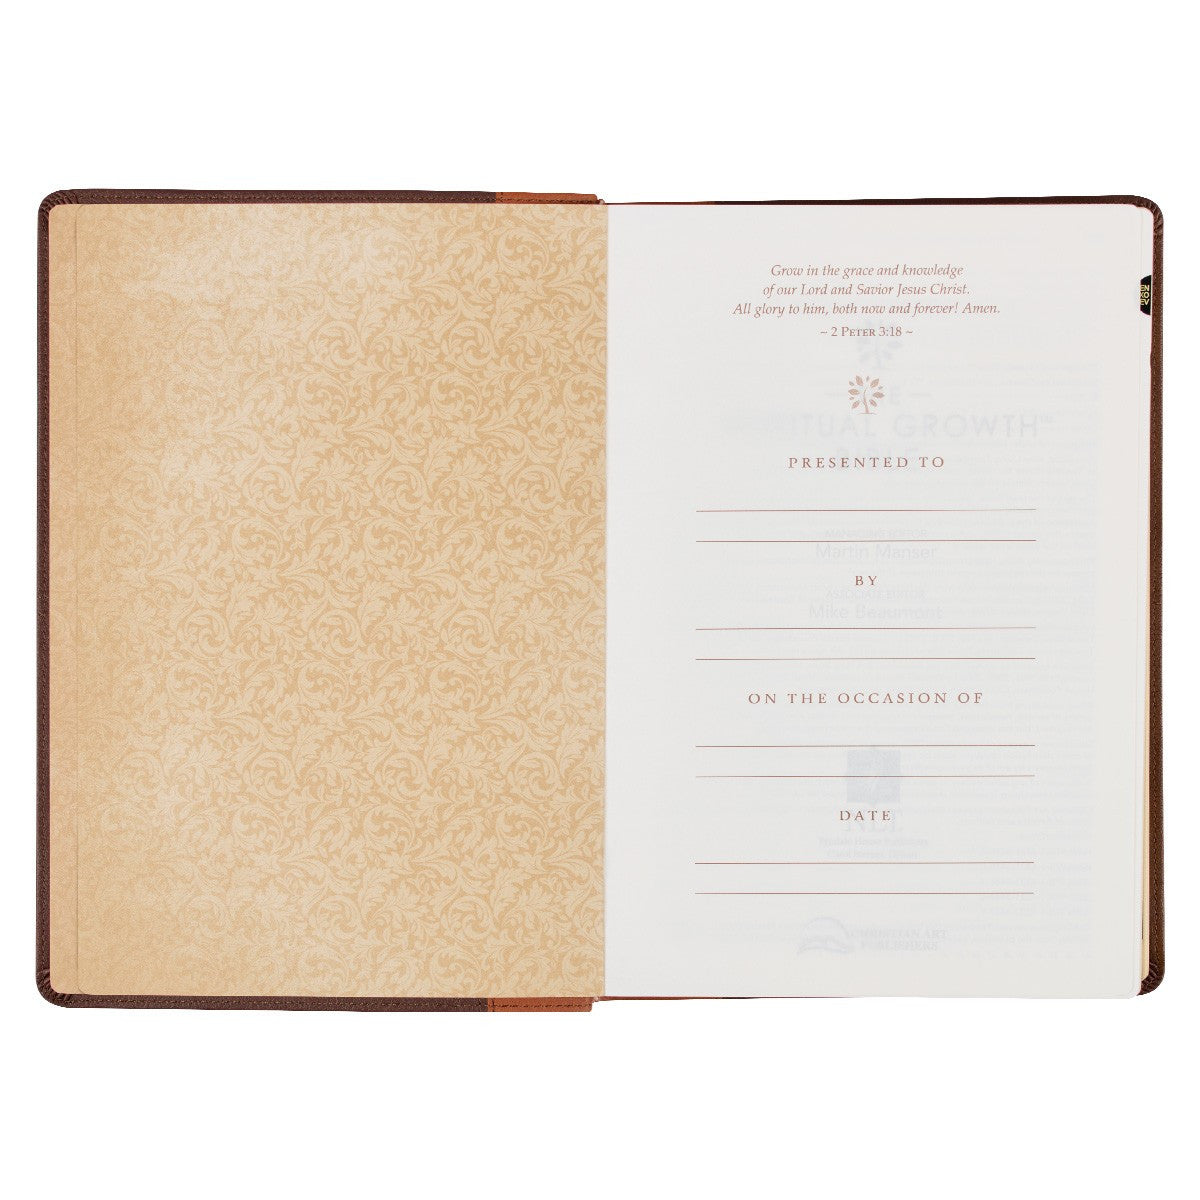 Two-tone Espresso and Toffee Brown Faux Leather Spiritual Growth Bible - The Christian Gift Company